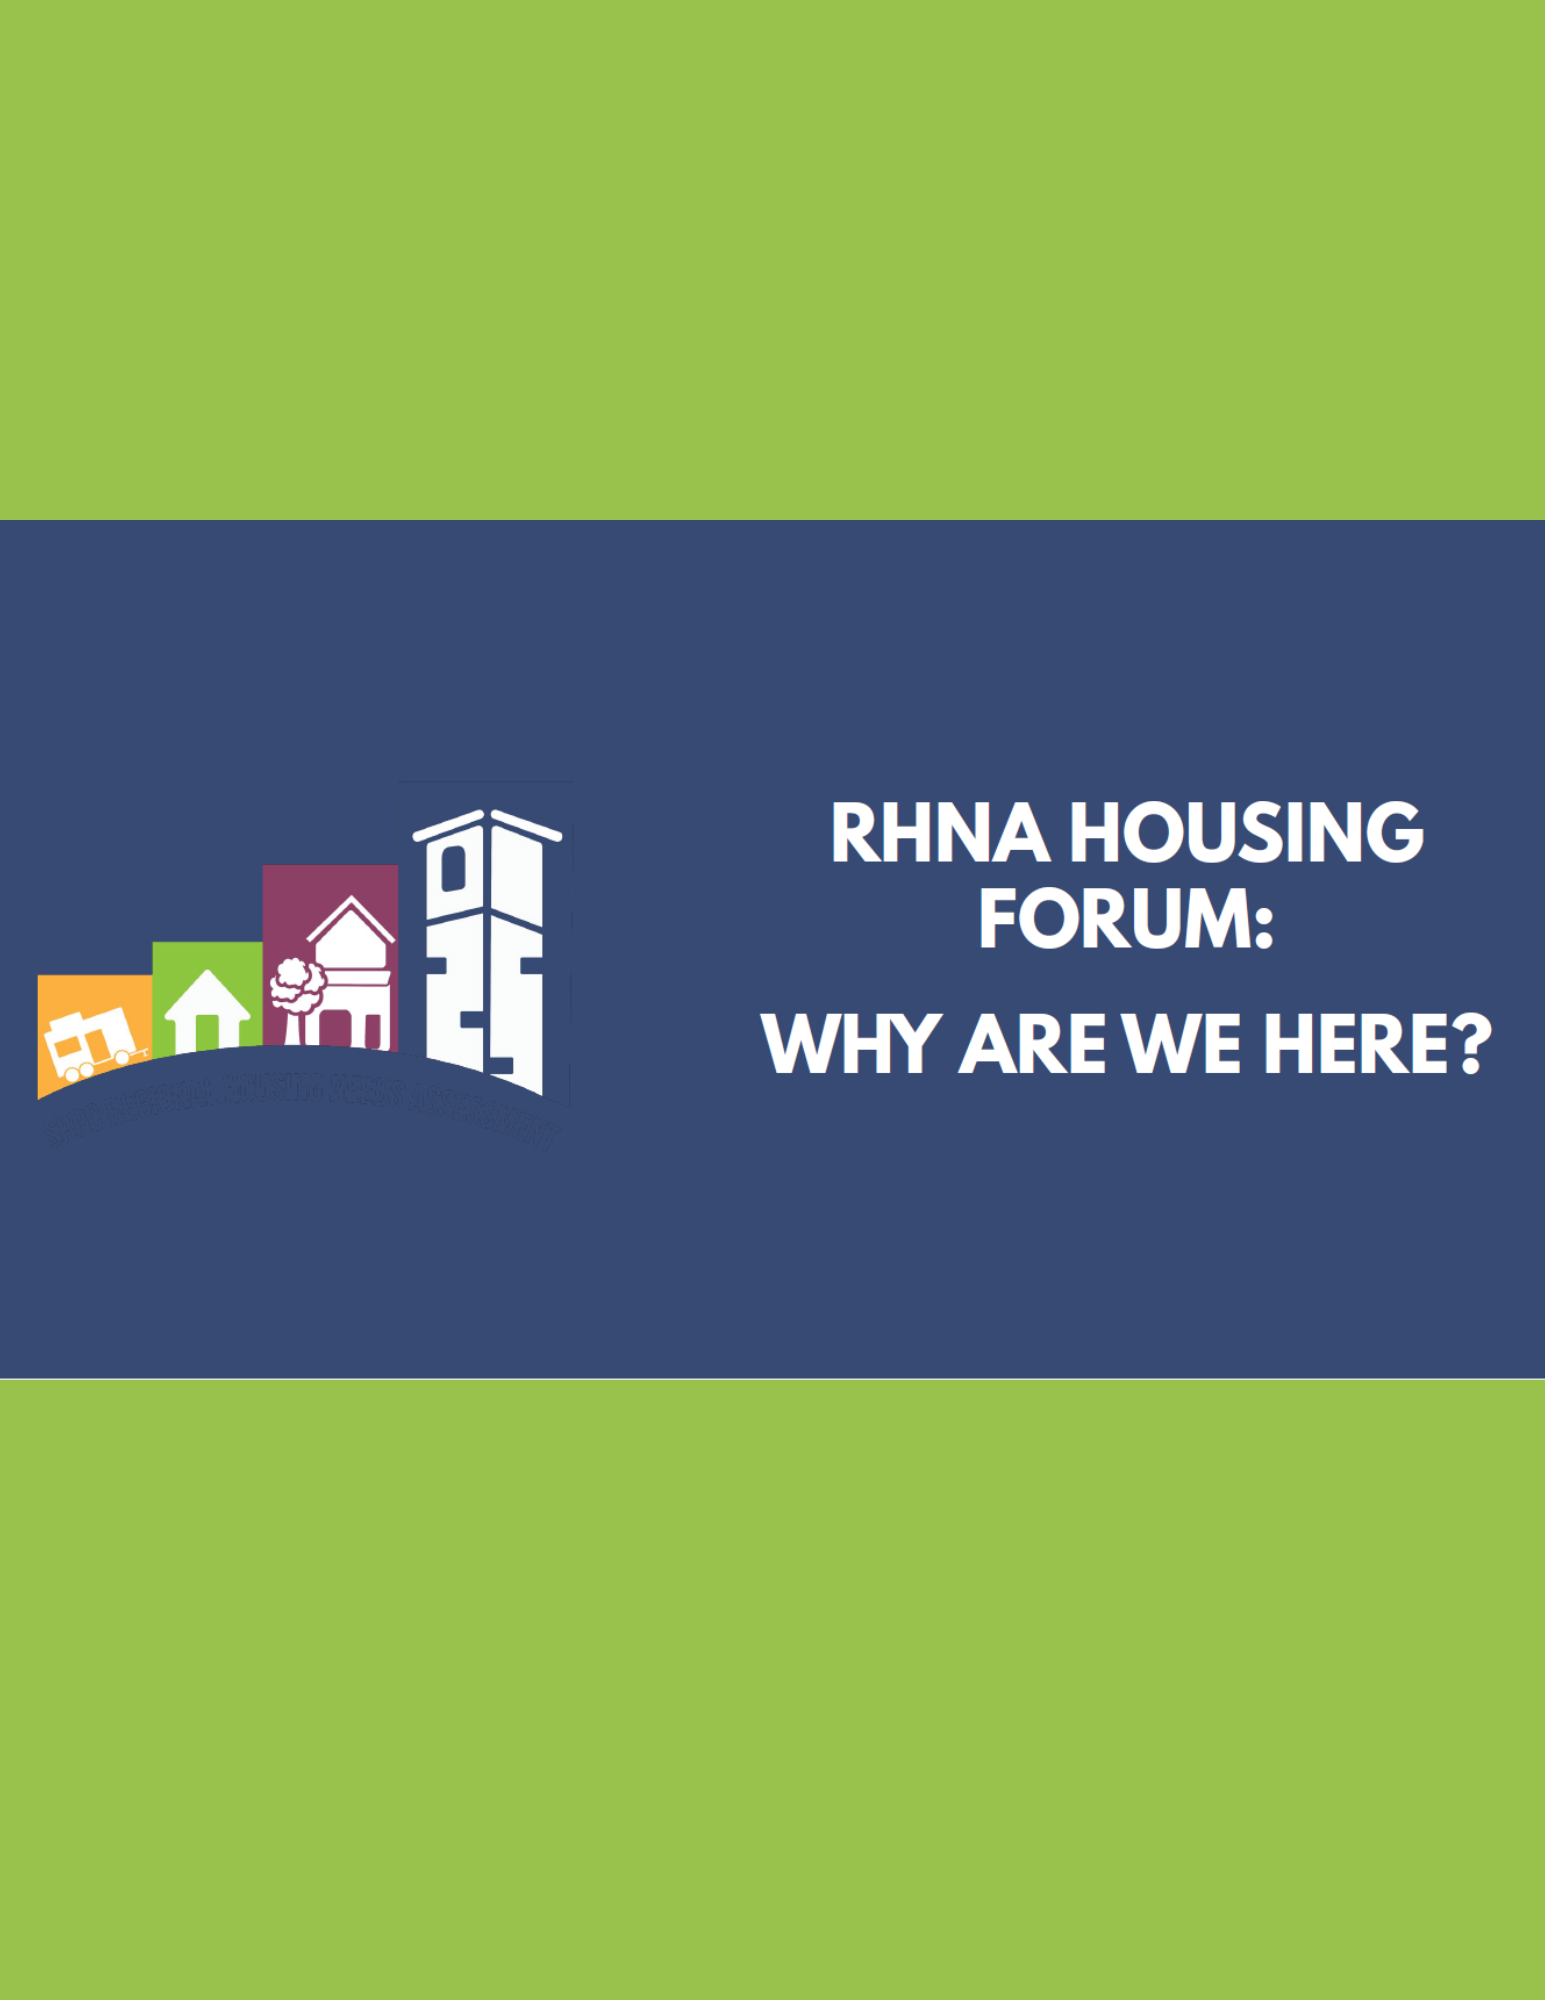 screenshot of the cover slide from SRPC's Housing Forum presentation